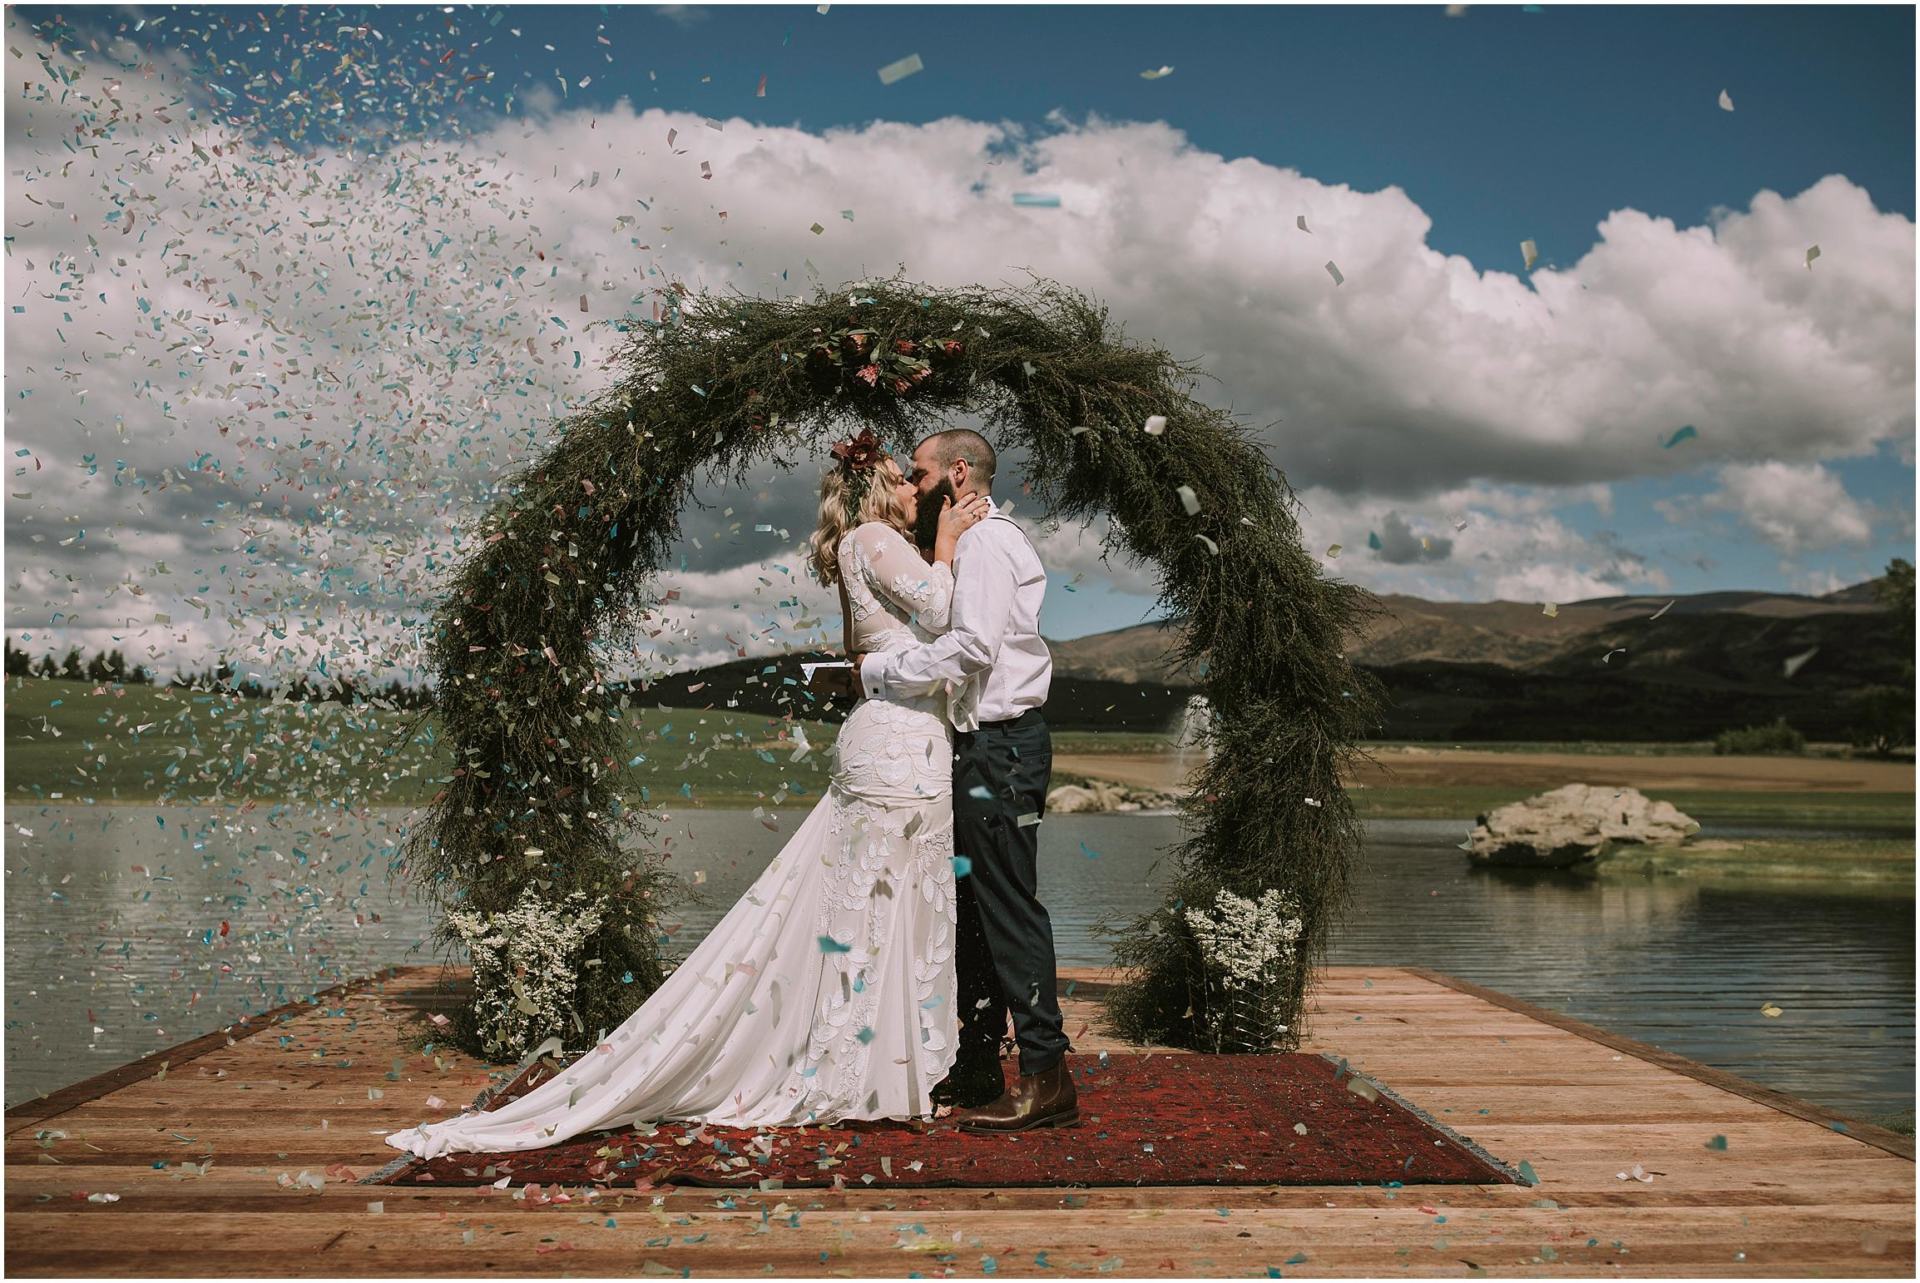 Charlotte Kiri Photography - Wedding Photography of a bride and groom standing at the end of a jetty as confetti is scattered around them, as they kiss and embrace lovingly, under an arch made of rustic green foliage and white flowers, with a backdrop of mountains and fields in Wanaka, New Zealand.